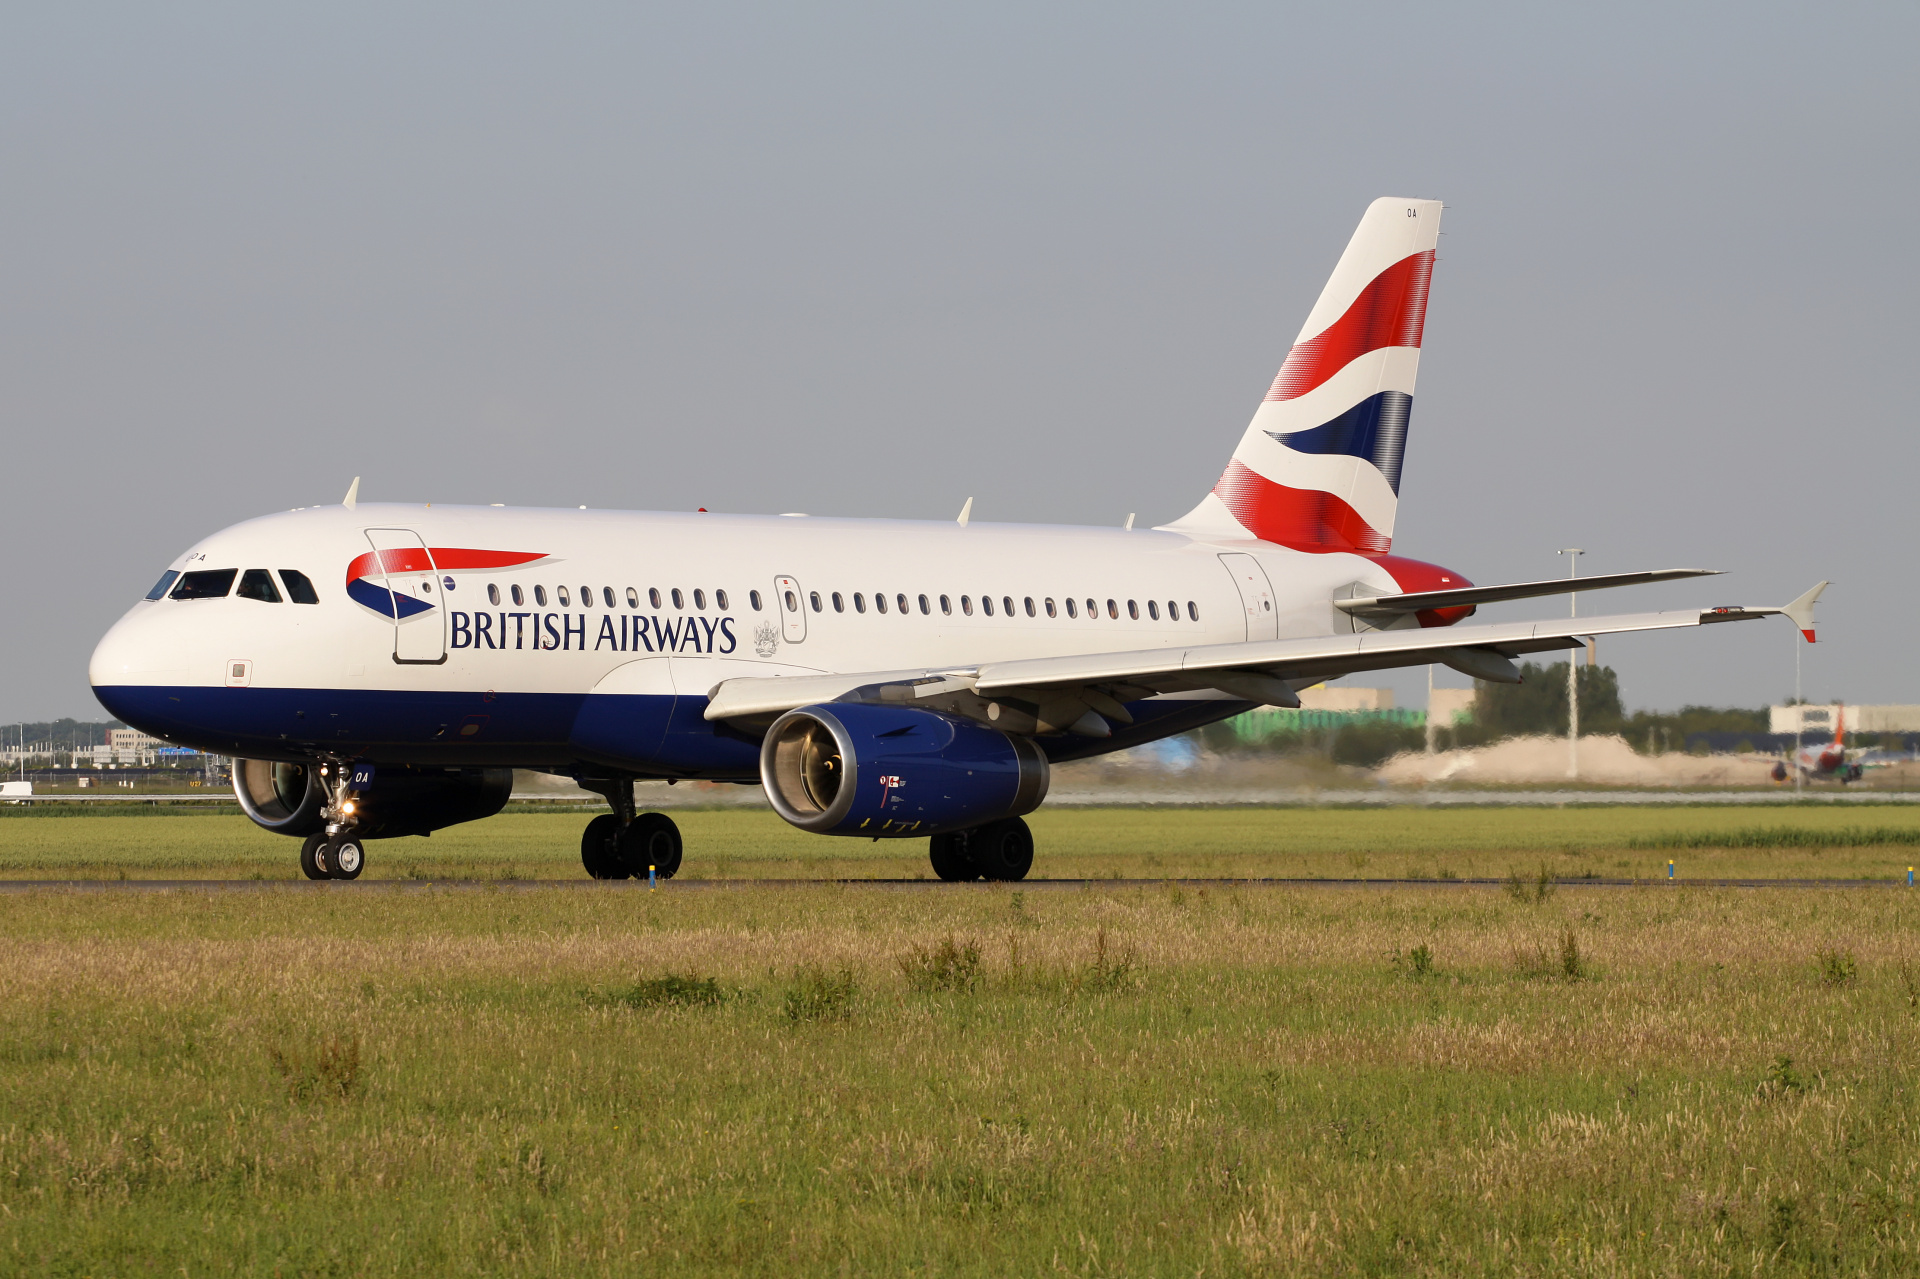 G-EUOA, British Airways (Aircraft » Schiphol Spotting » Airbus A319-100)